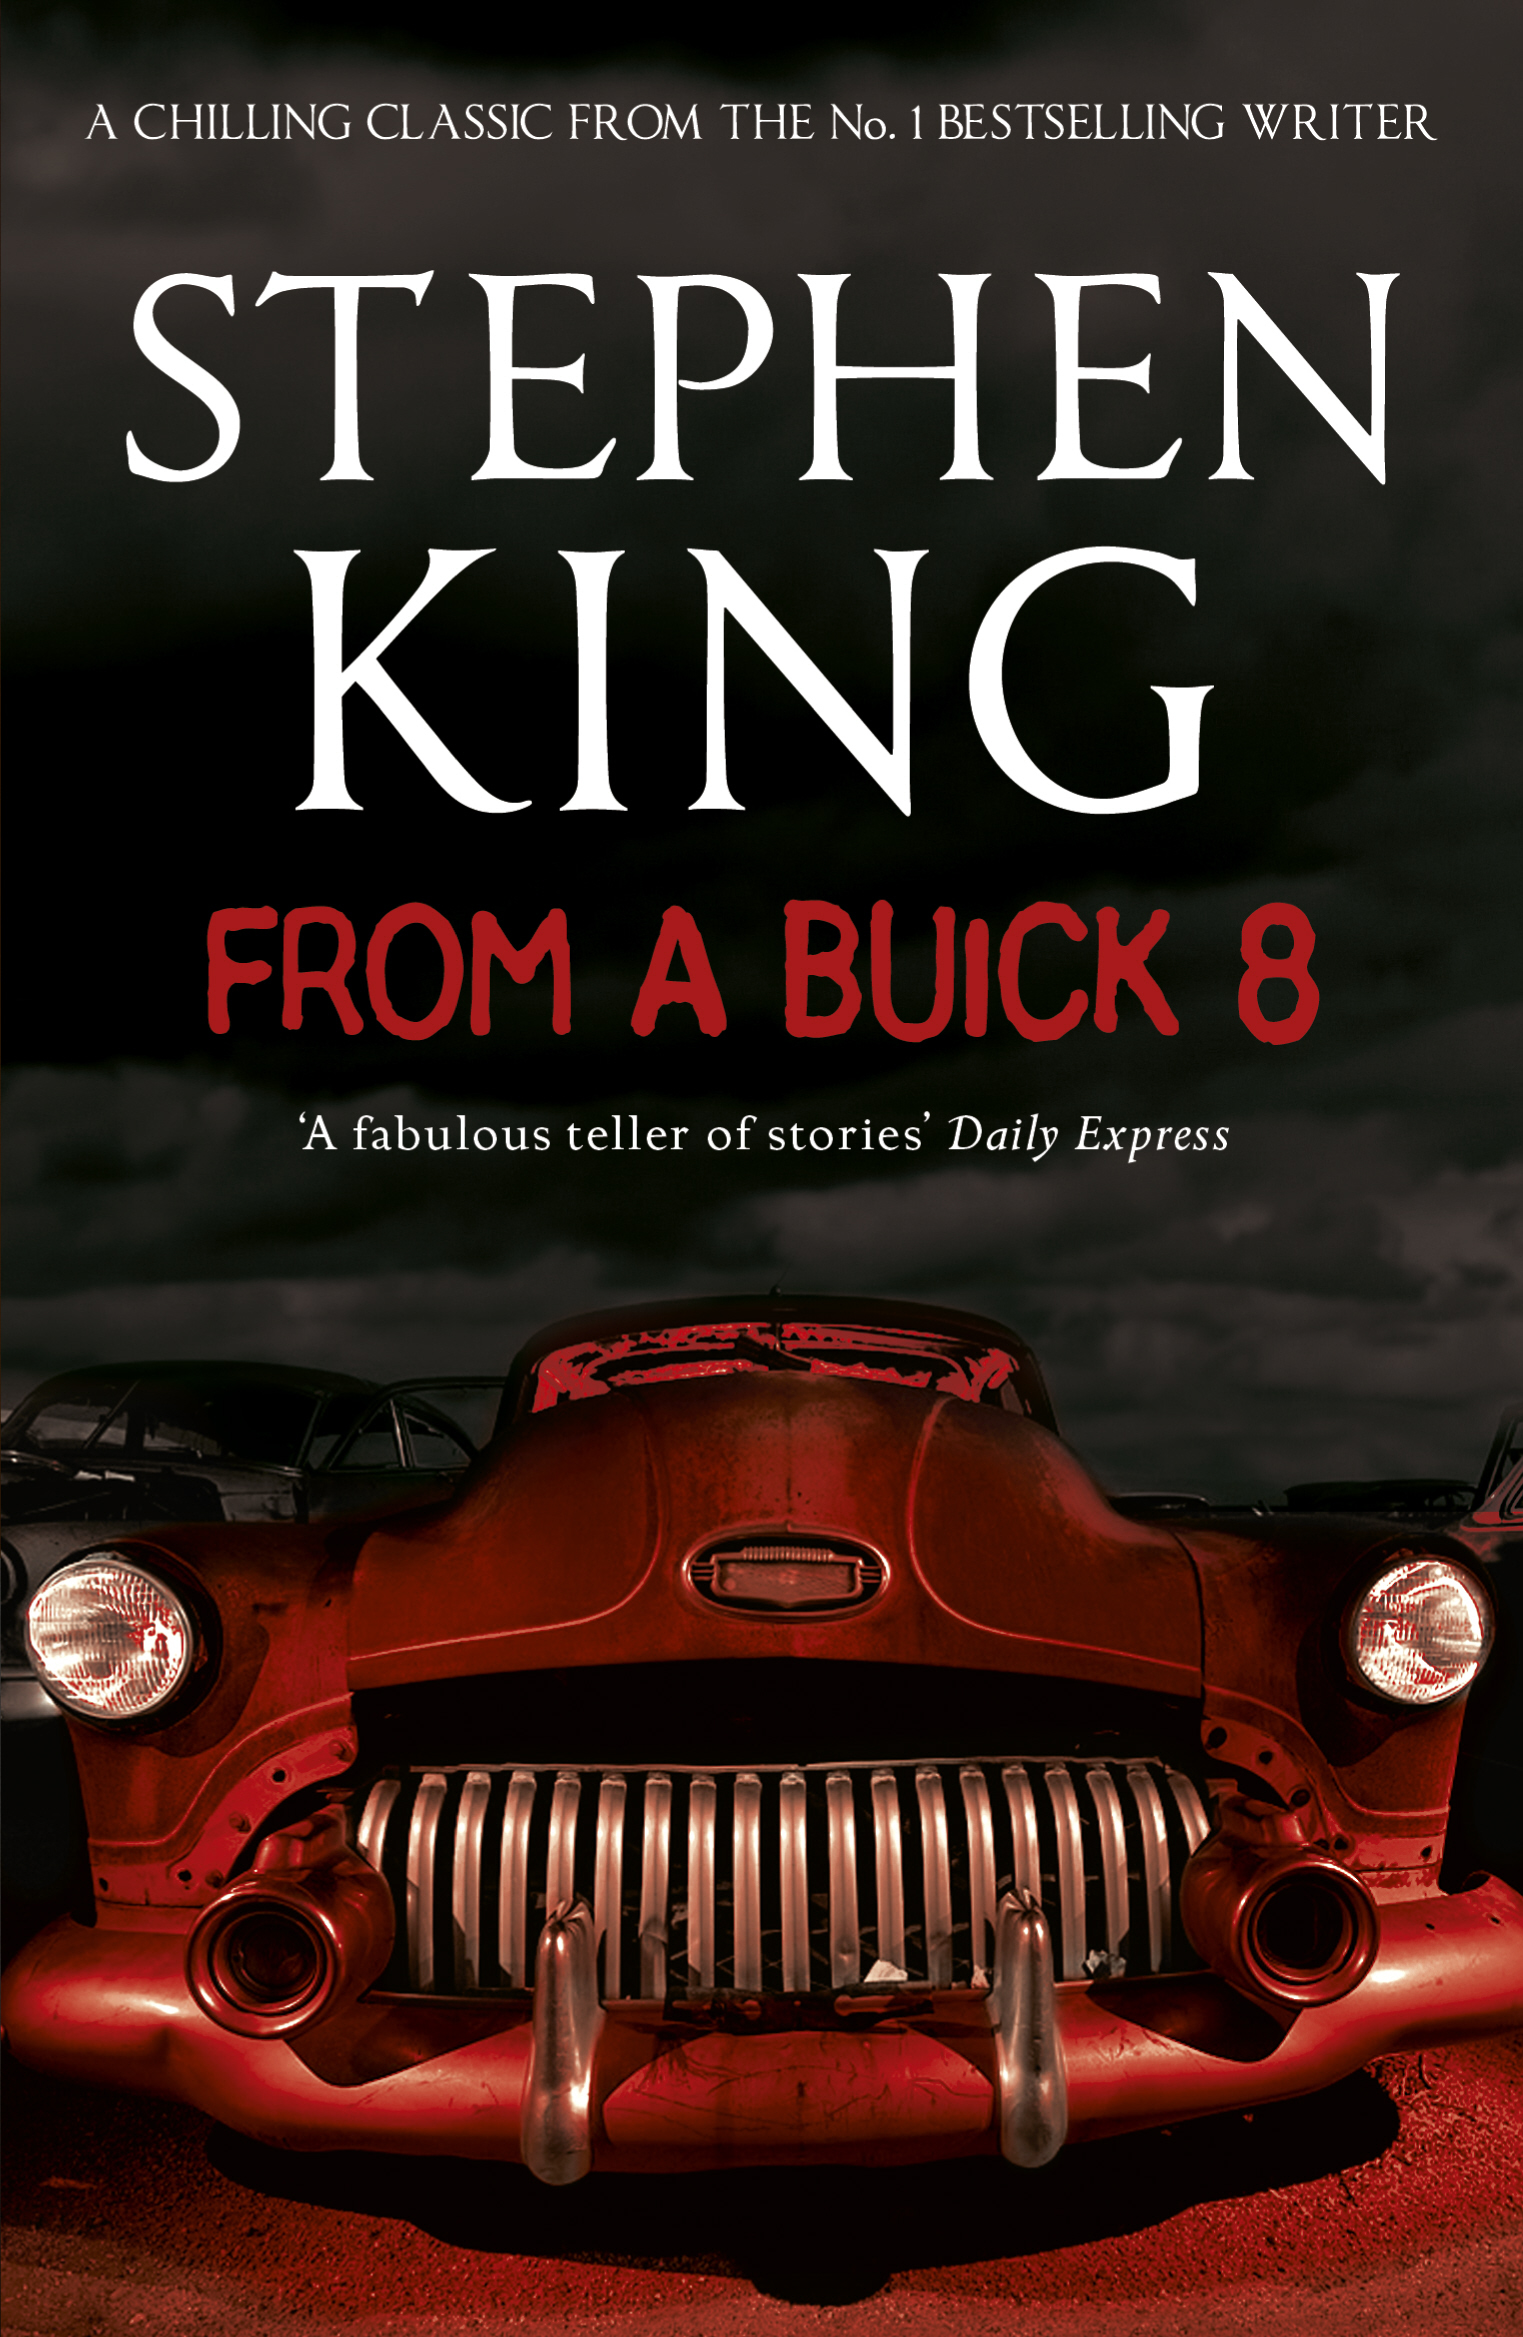 From A Buick 8- Another Stephen King Cover